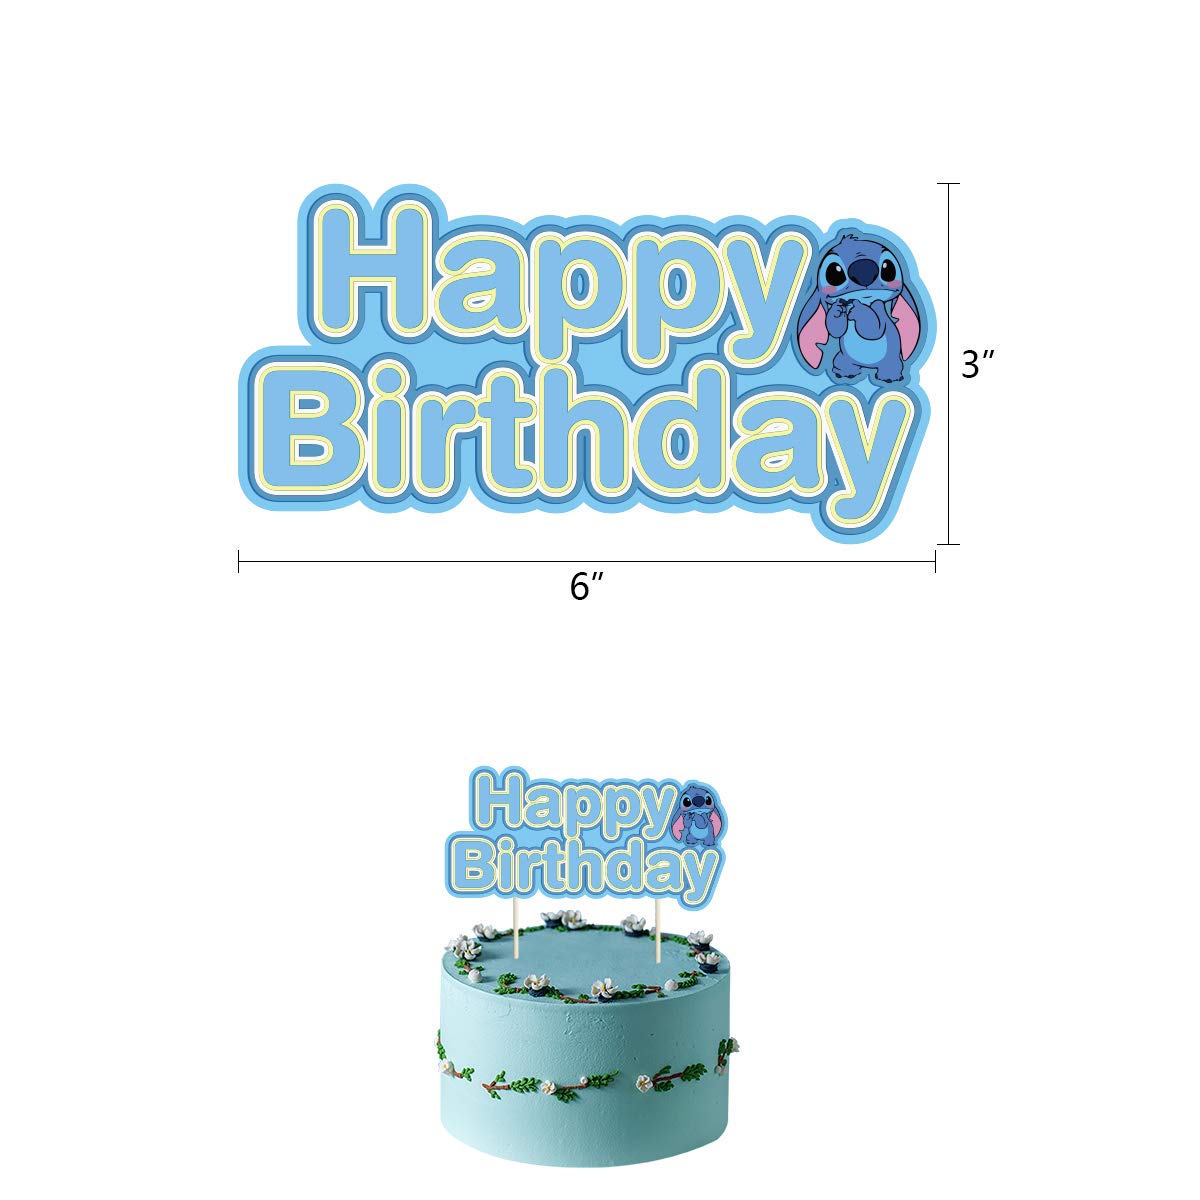 Lilo Birthday Party Decoration, Stitch Birthday Banner Cake Toppers Balloons,Stitch Theme Birthday Party Decorations